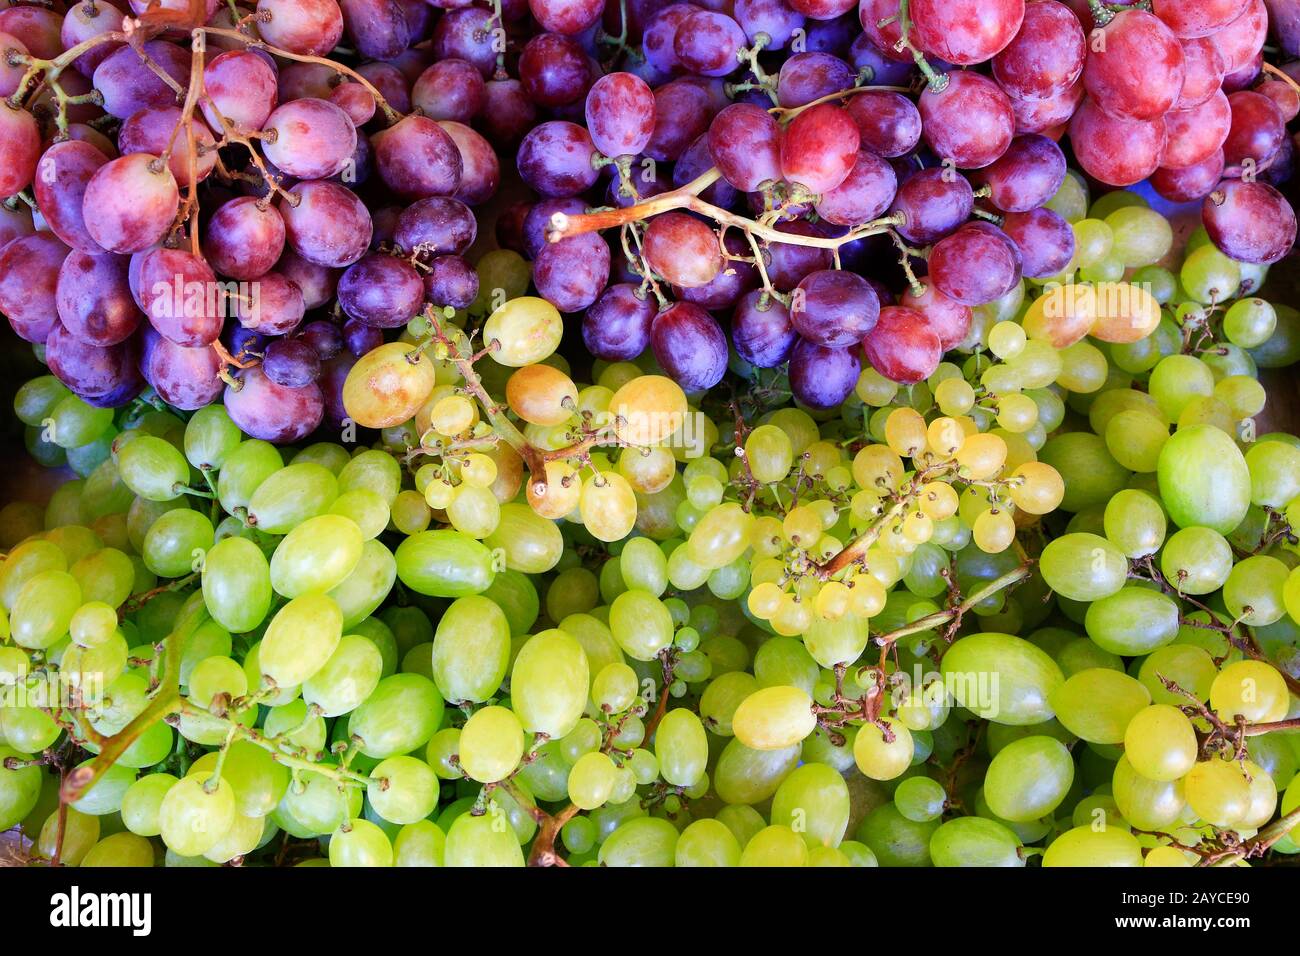 Blue and white grape bunches at market Stock Photo